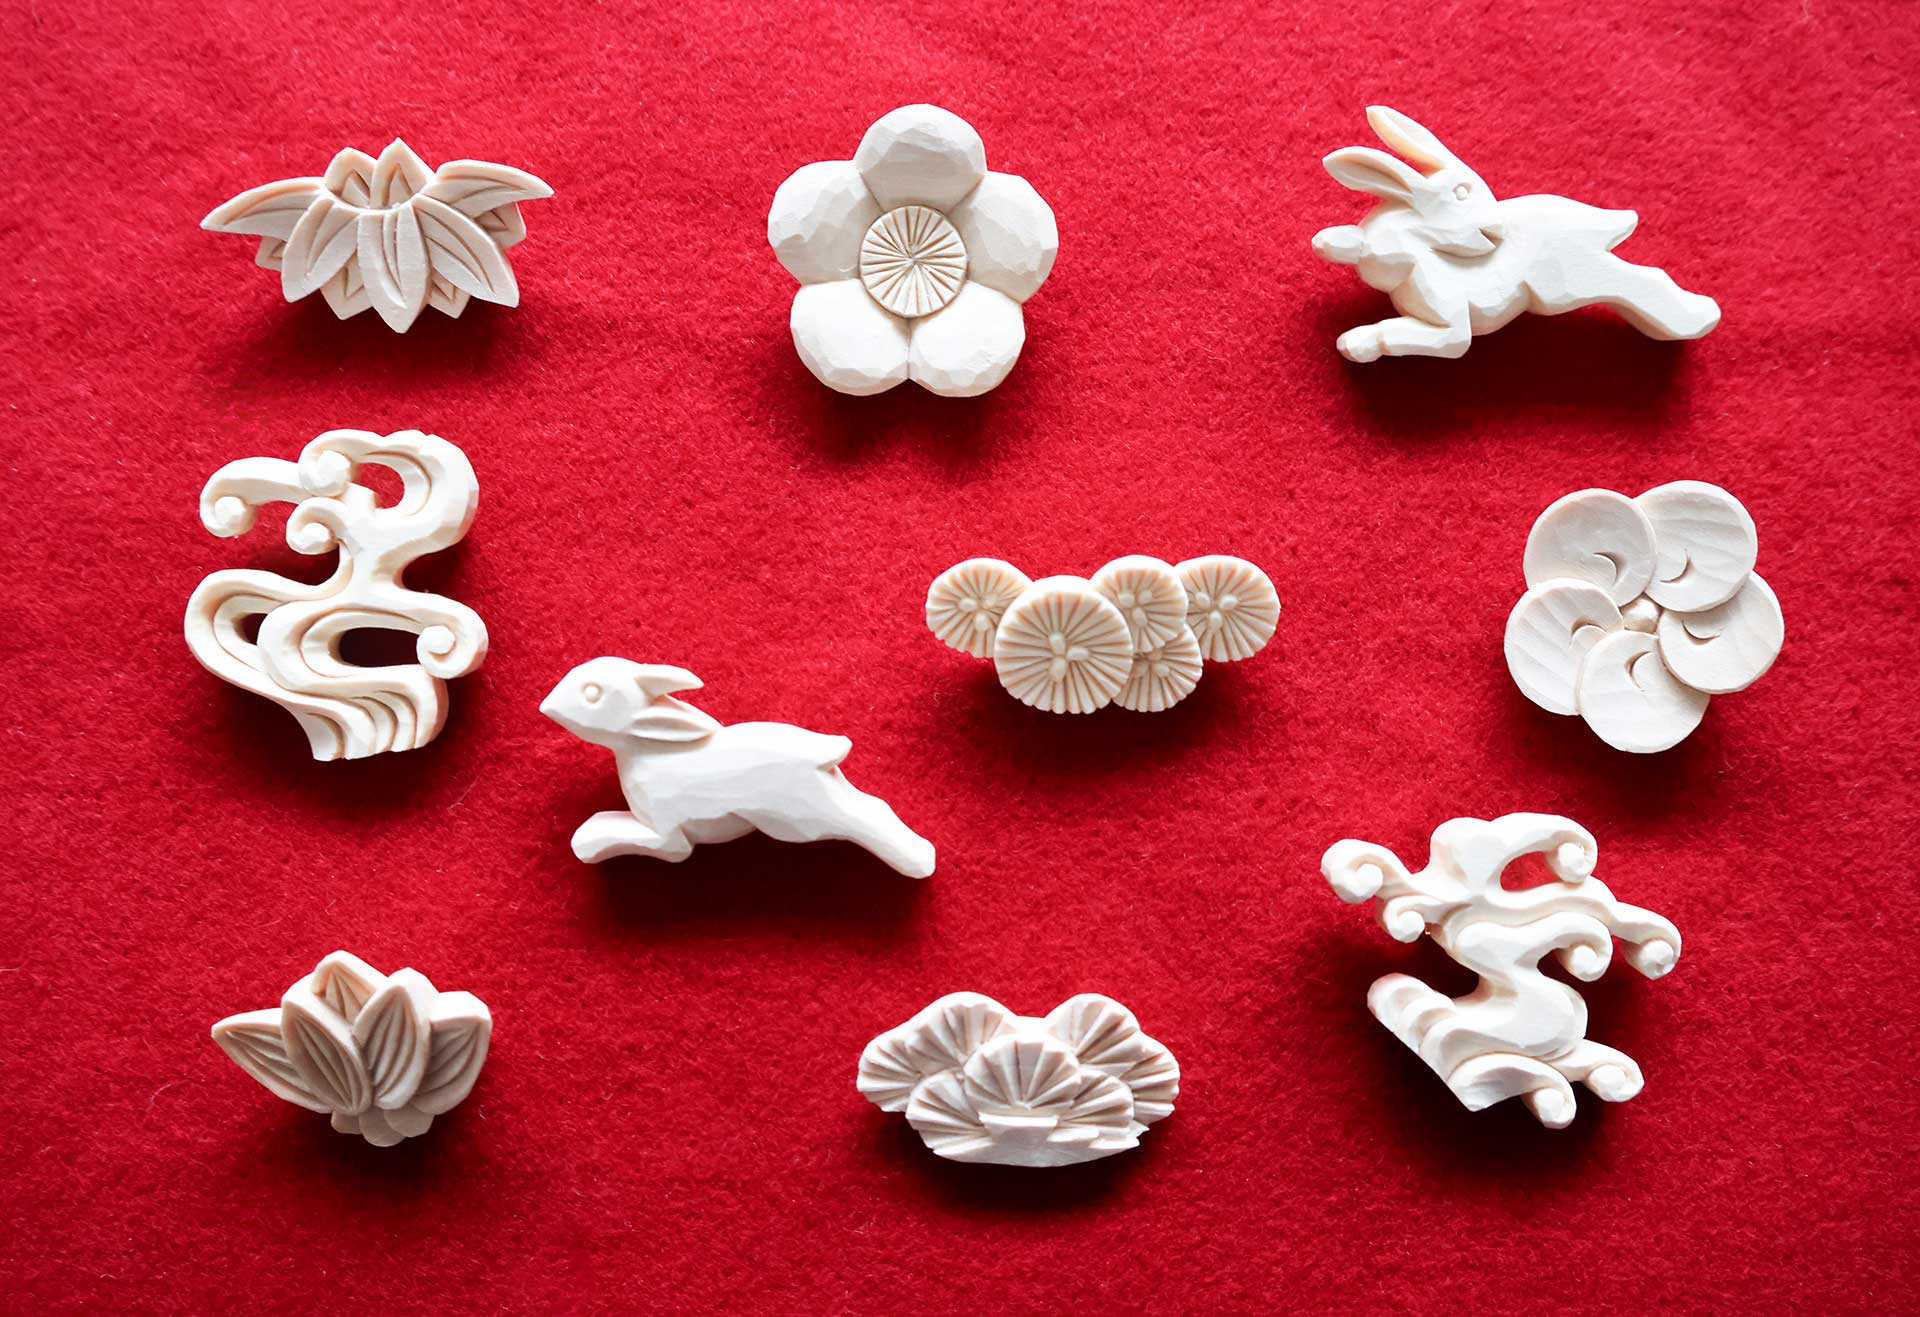 Heartwarming Wood-carved Brooches, Created by a Carving Artisan of Yamagata Buddhist Altars